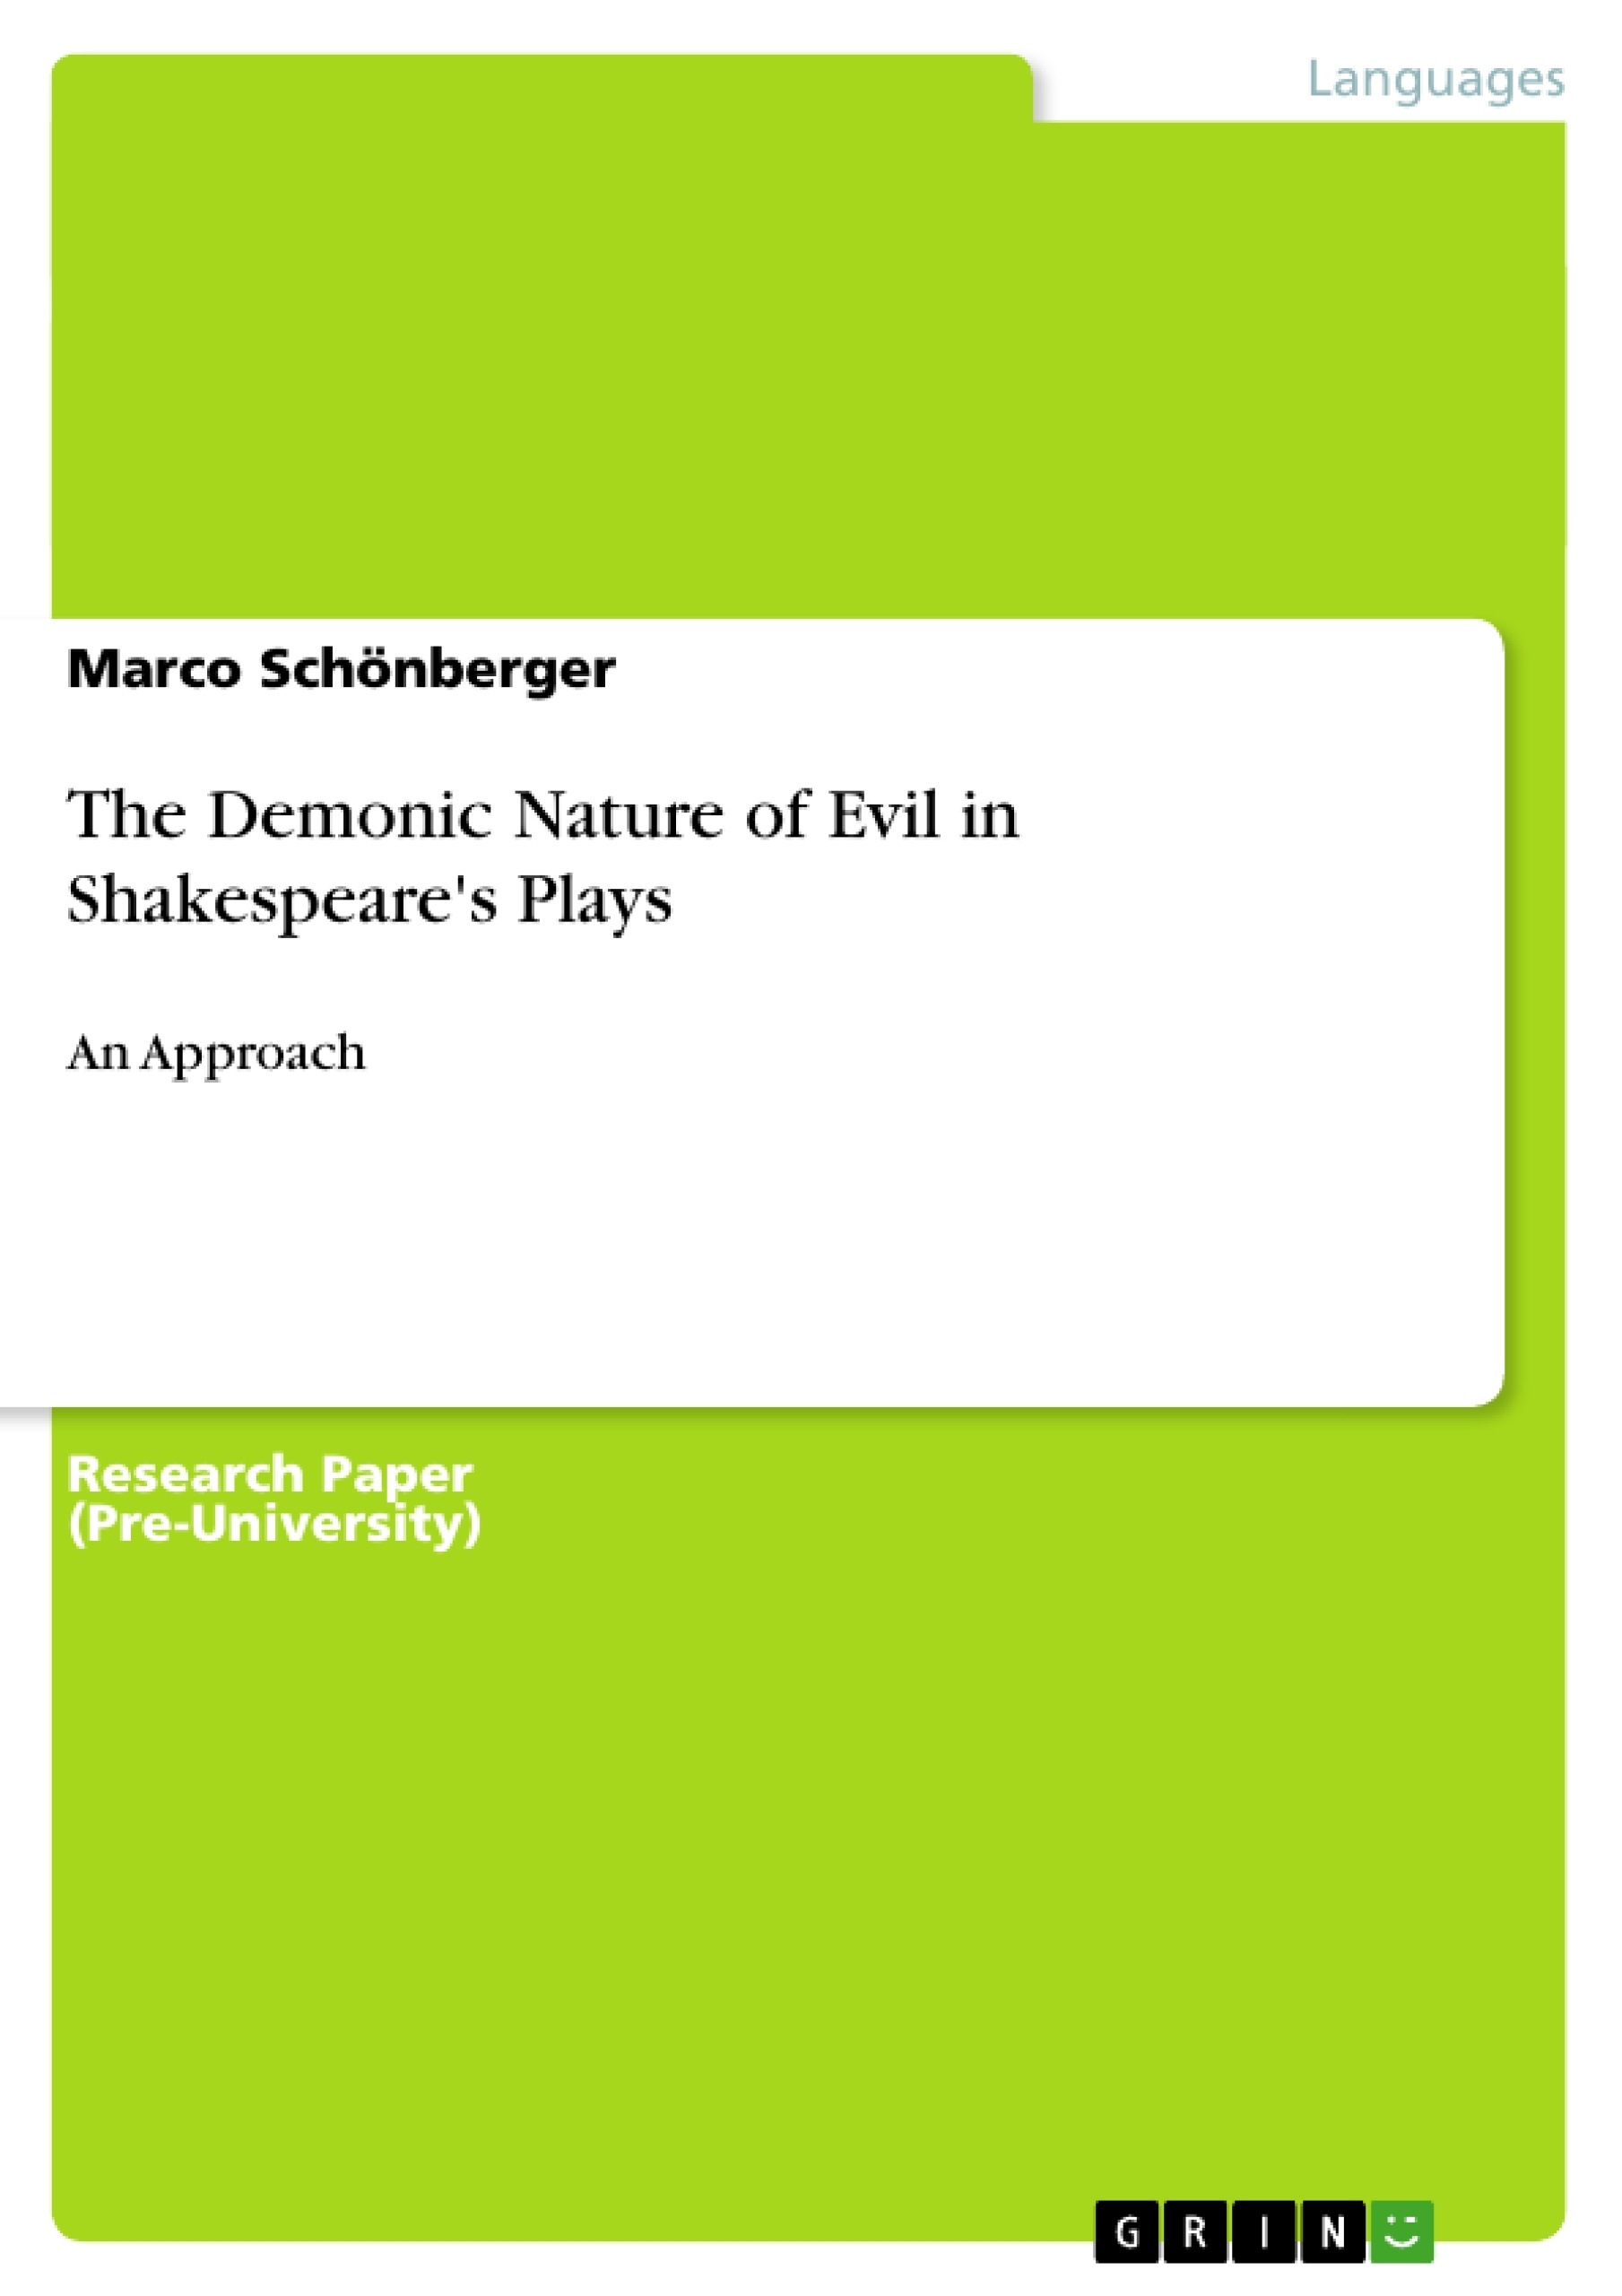 Title: The Demonic Nature of Evil in Shakespeare's Plays